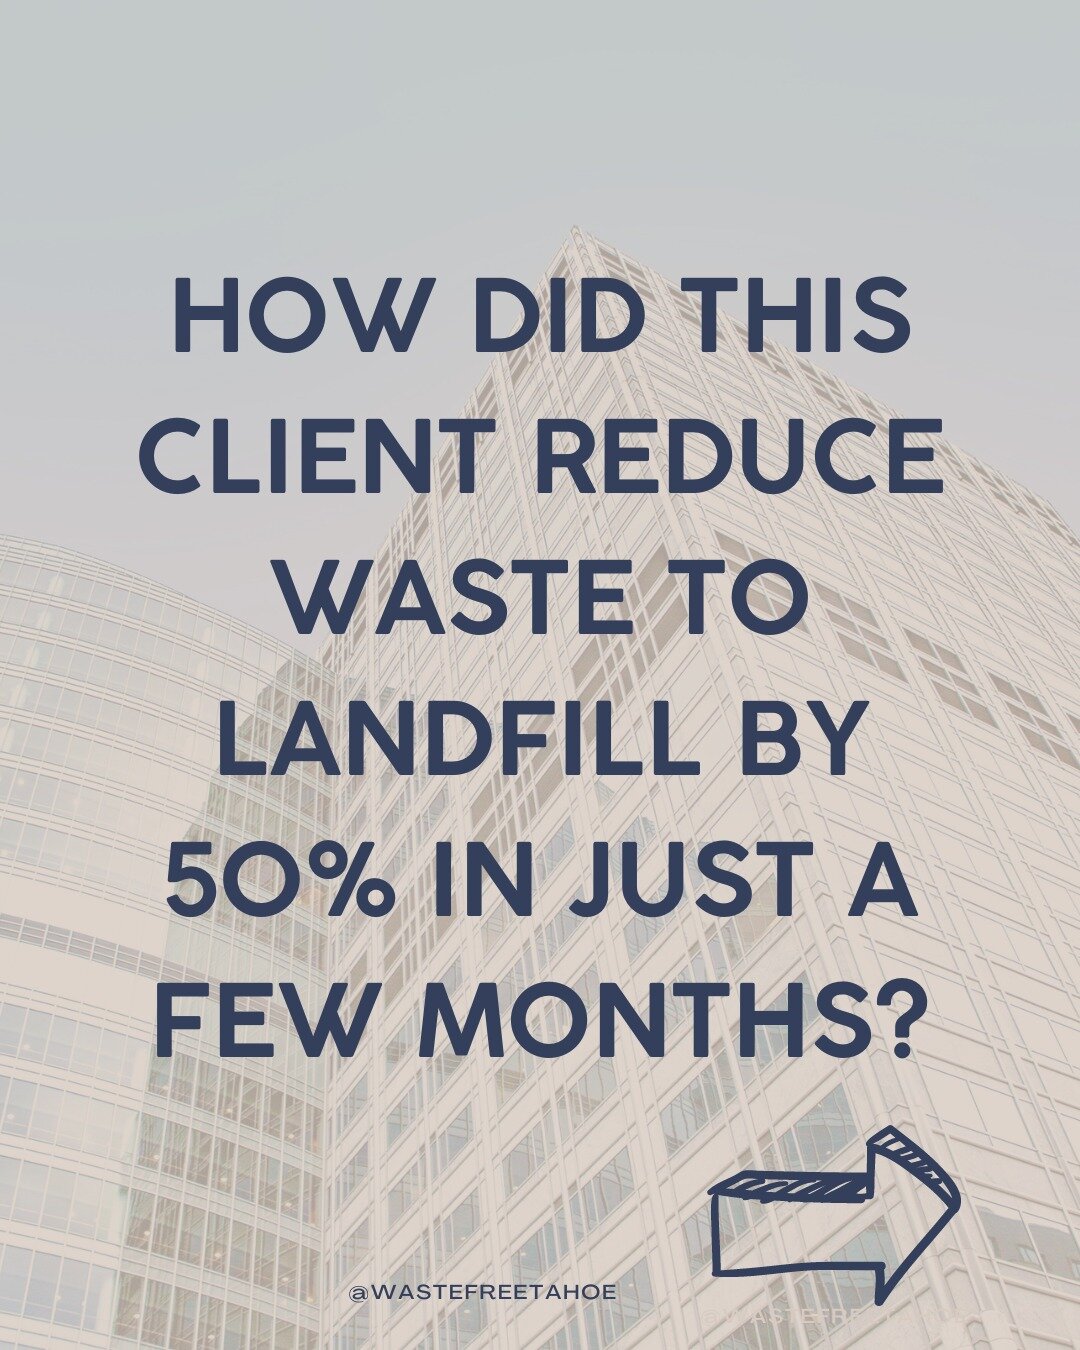 Check out this client success story to see how they they reduced their waste to landfill by 50%. The key for them was EDUCATION. Having an involved and trained staff is crucial to eliminating waste. 

It's not as hard as it seems specially when you h